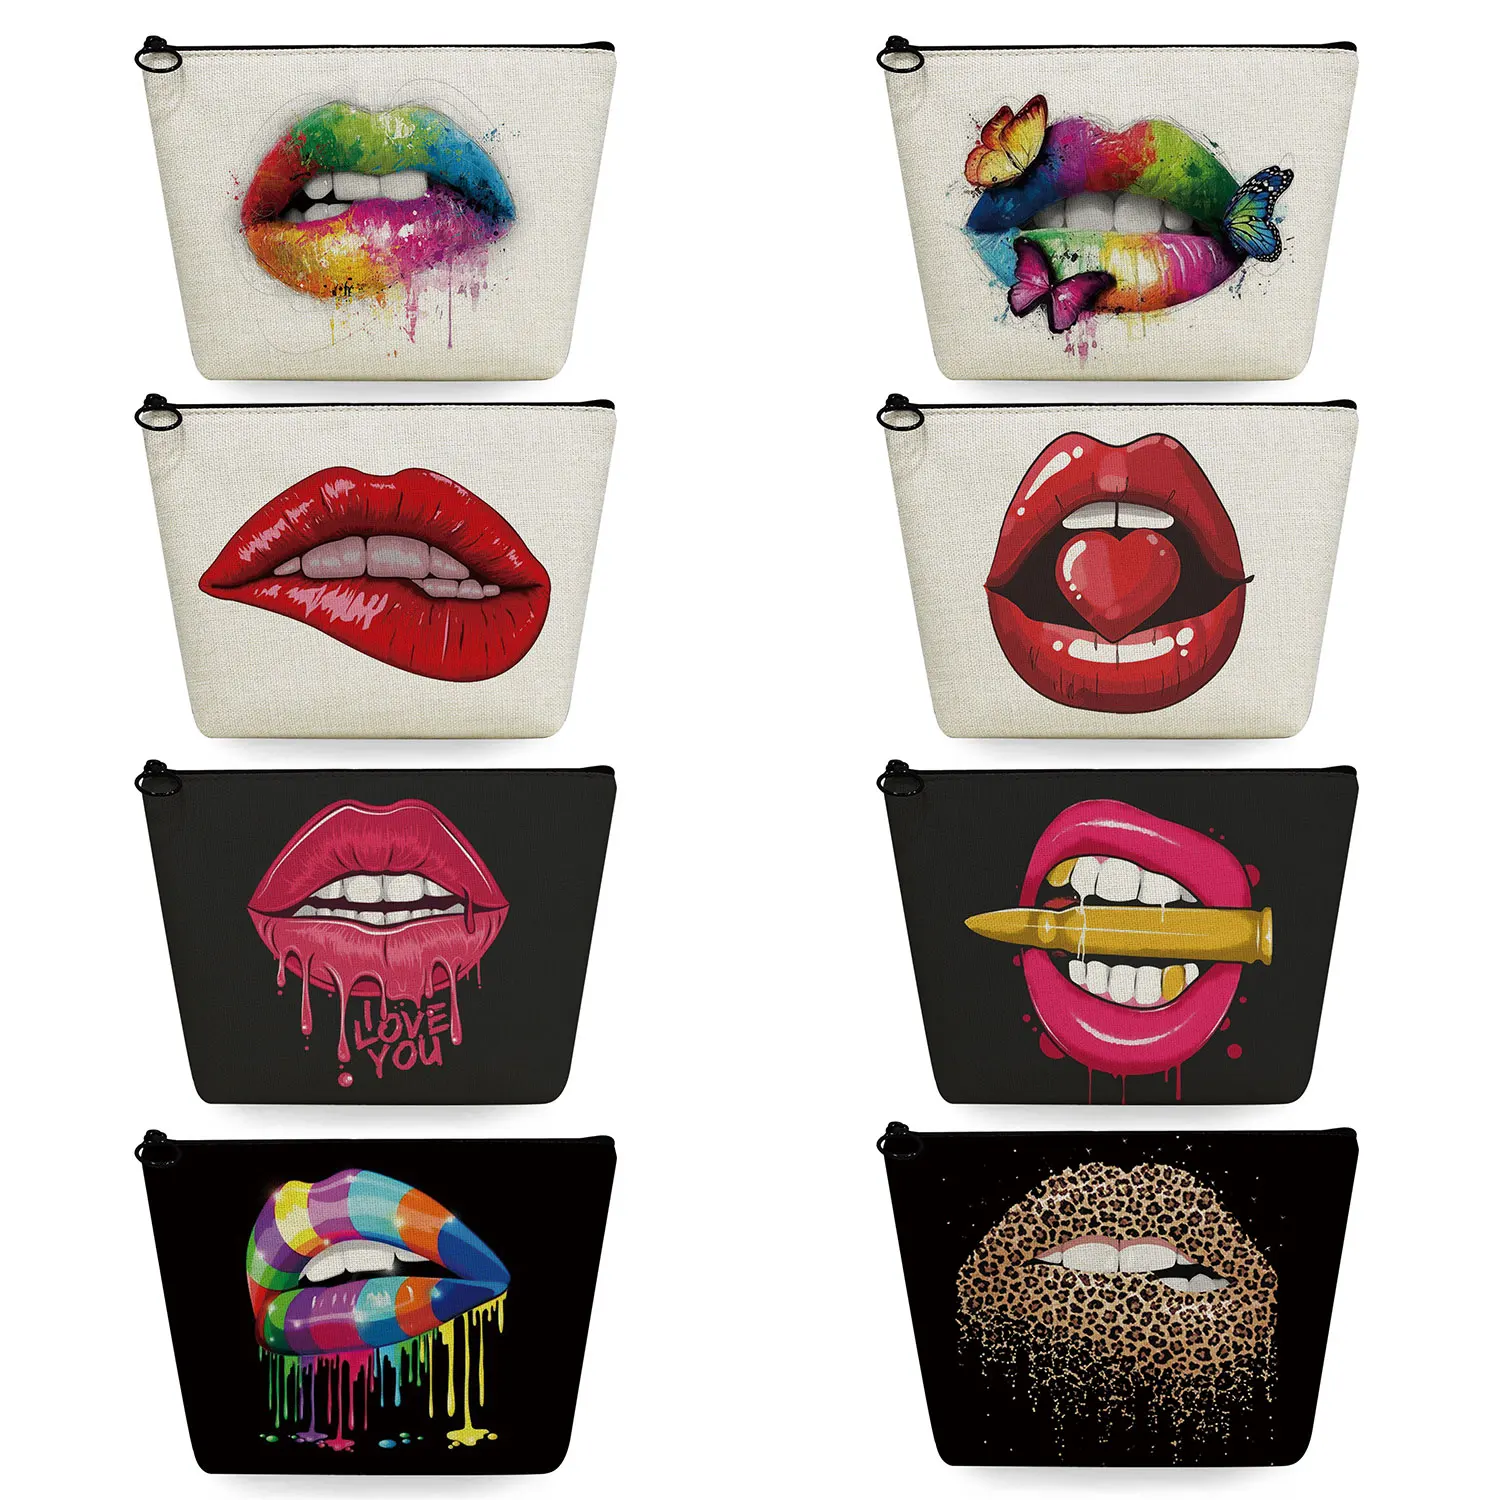 

Heat Transfer Women's Cosmetic Bag Fashion Pencil Cases Hipster Red Lip Travel Toiletry Bag Makeup Organizer Colorful Lips Print